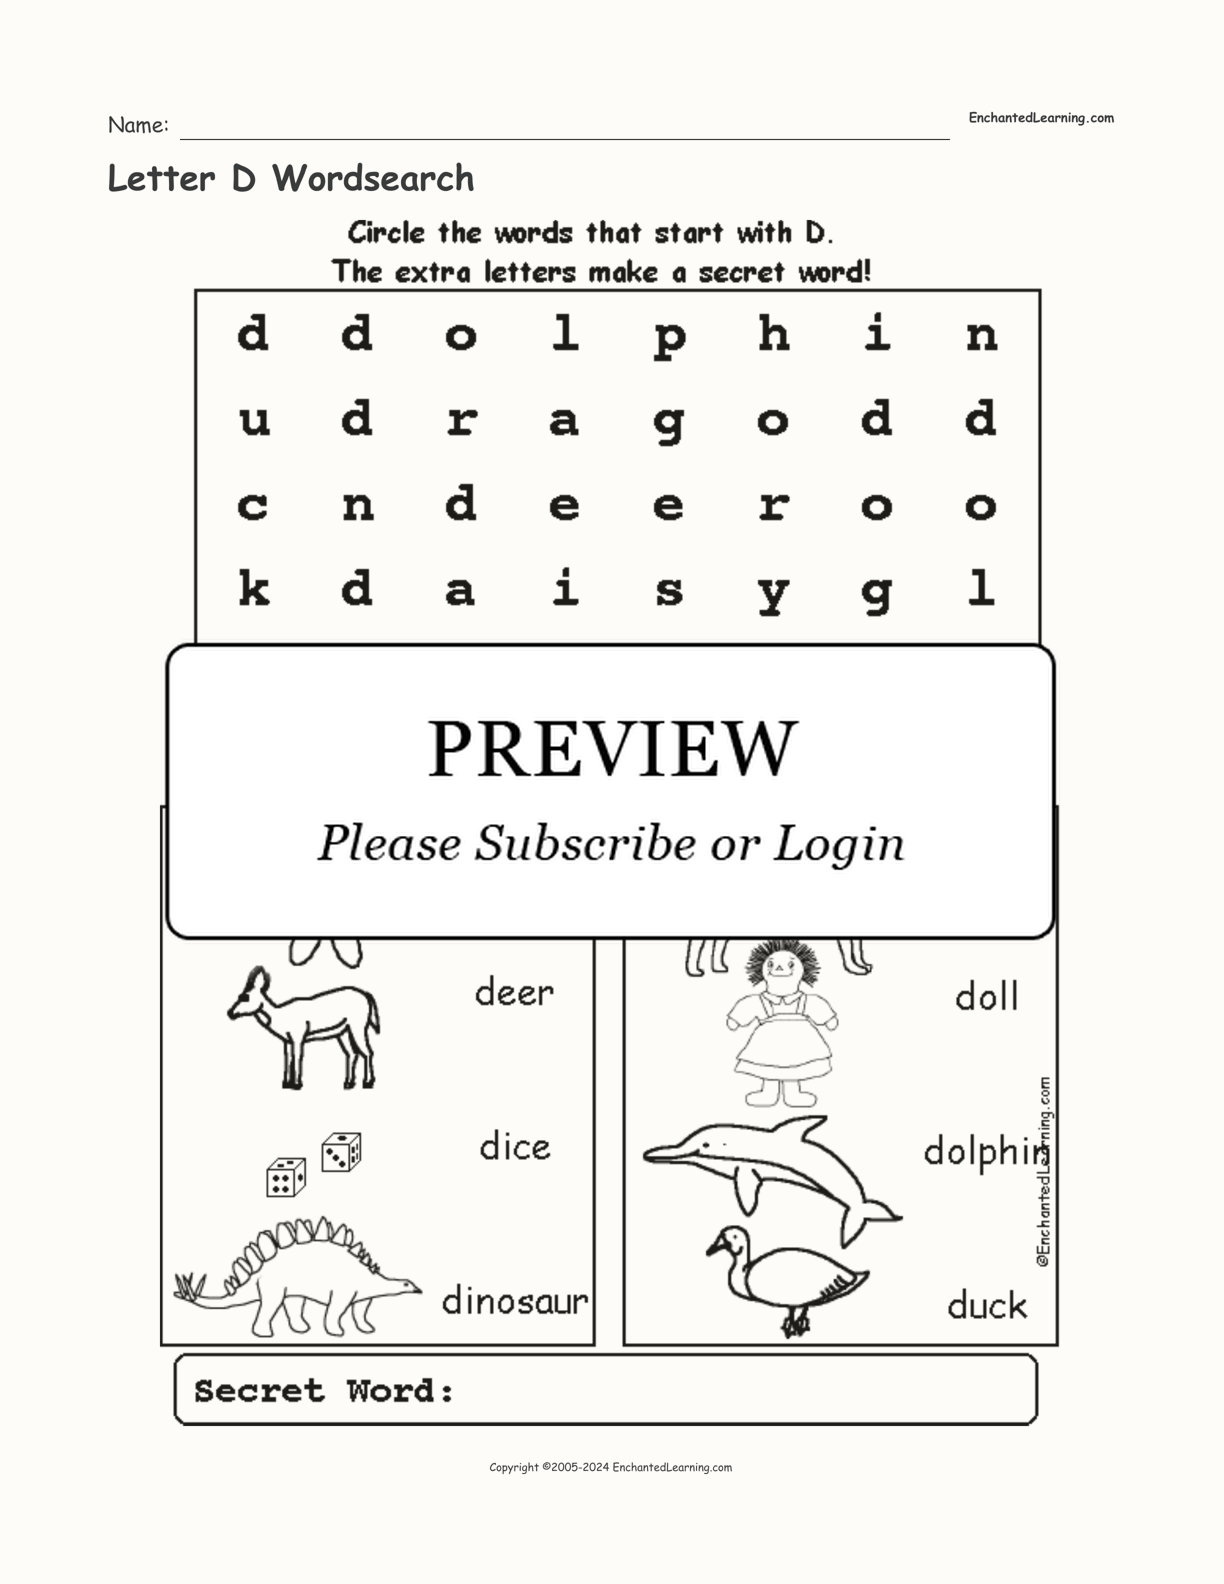 Letter D Wordsearch interactive worksheet page 1